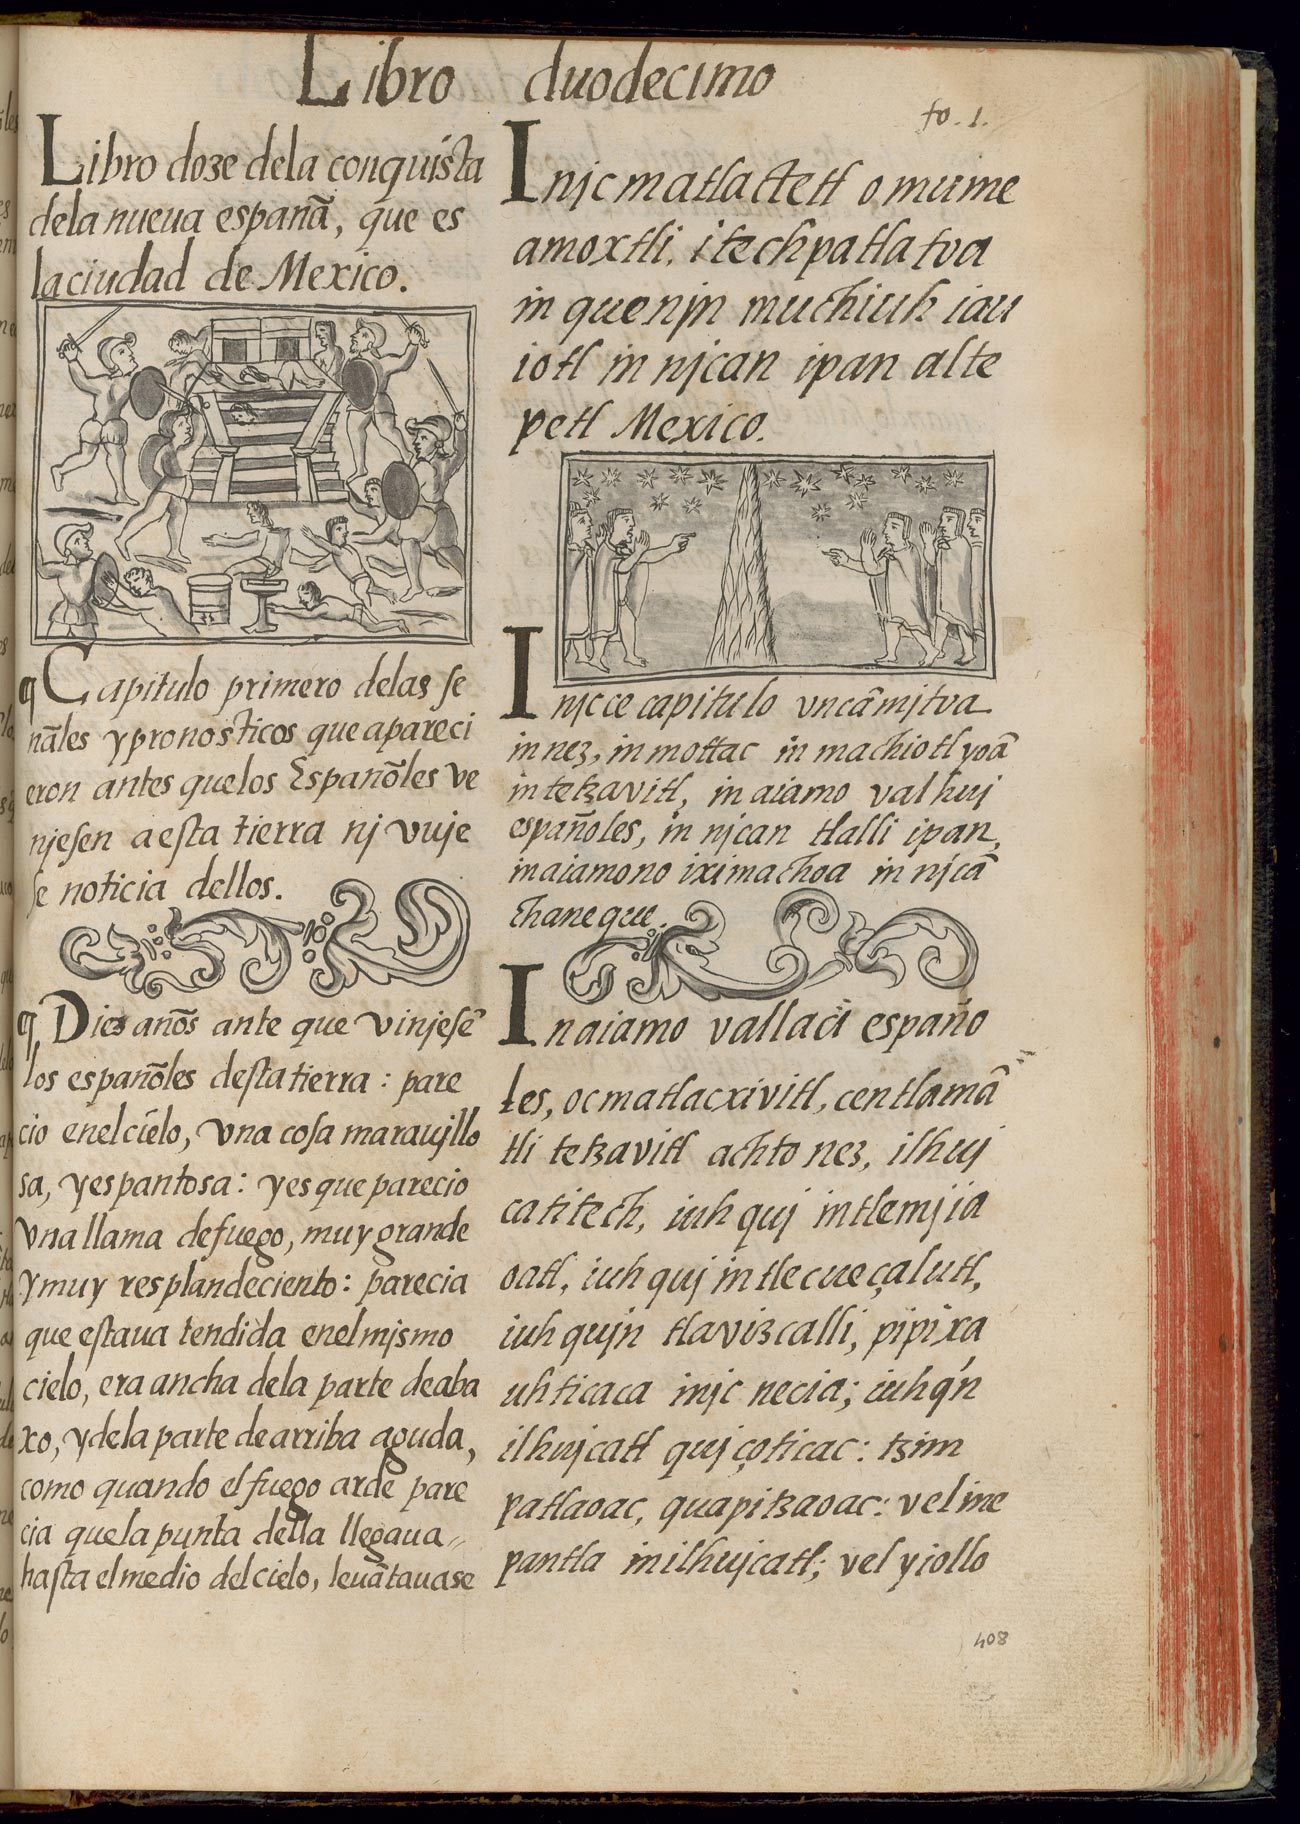 First page of Book 12 of the Florentine Codex (“Of the Conquest of New Spain”) showing the Toxcatl Massacre and a second illustration of the omens foretelling the arrival of Spaniards. Ms. Mediceo Palatino 220, 1577, fol. 1. Courtesy of the Biblioteca Medicea Laurenziana, Florence, and by permission of MiBACT